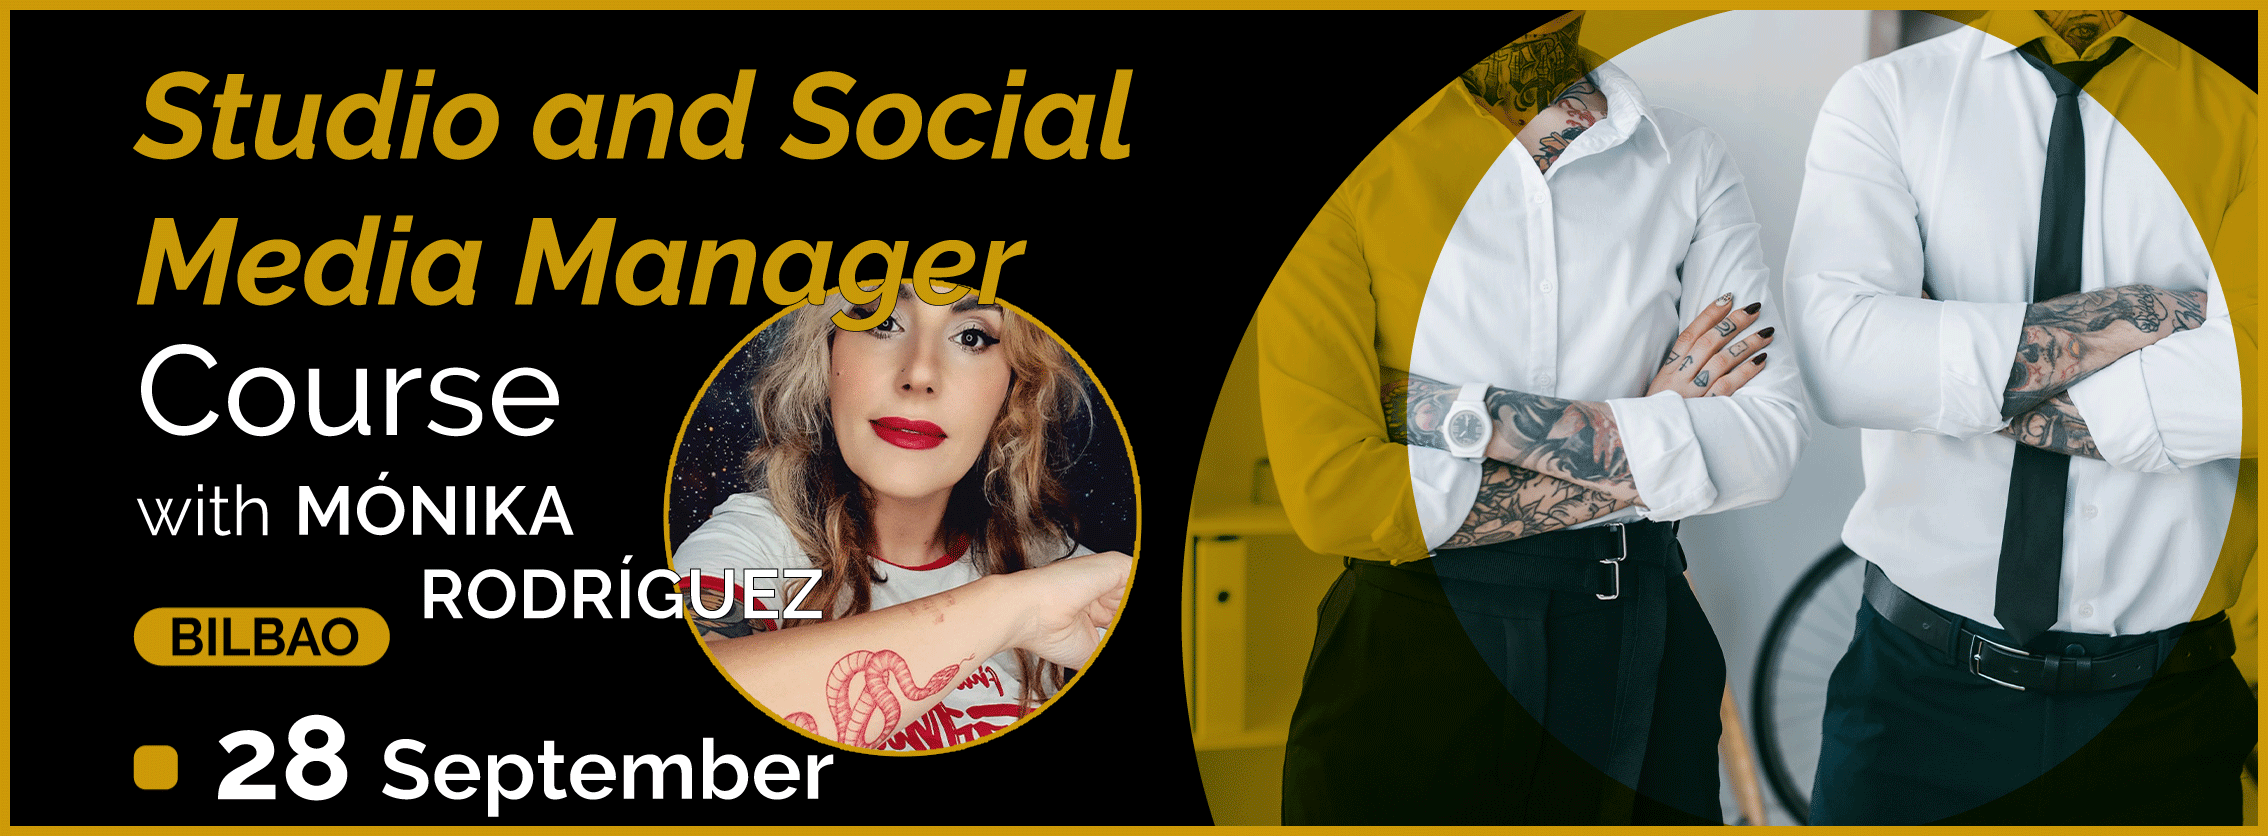 Studio and Social media Manager Course